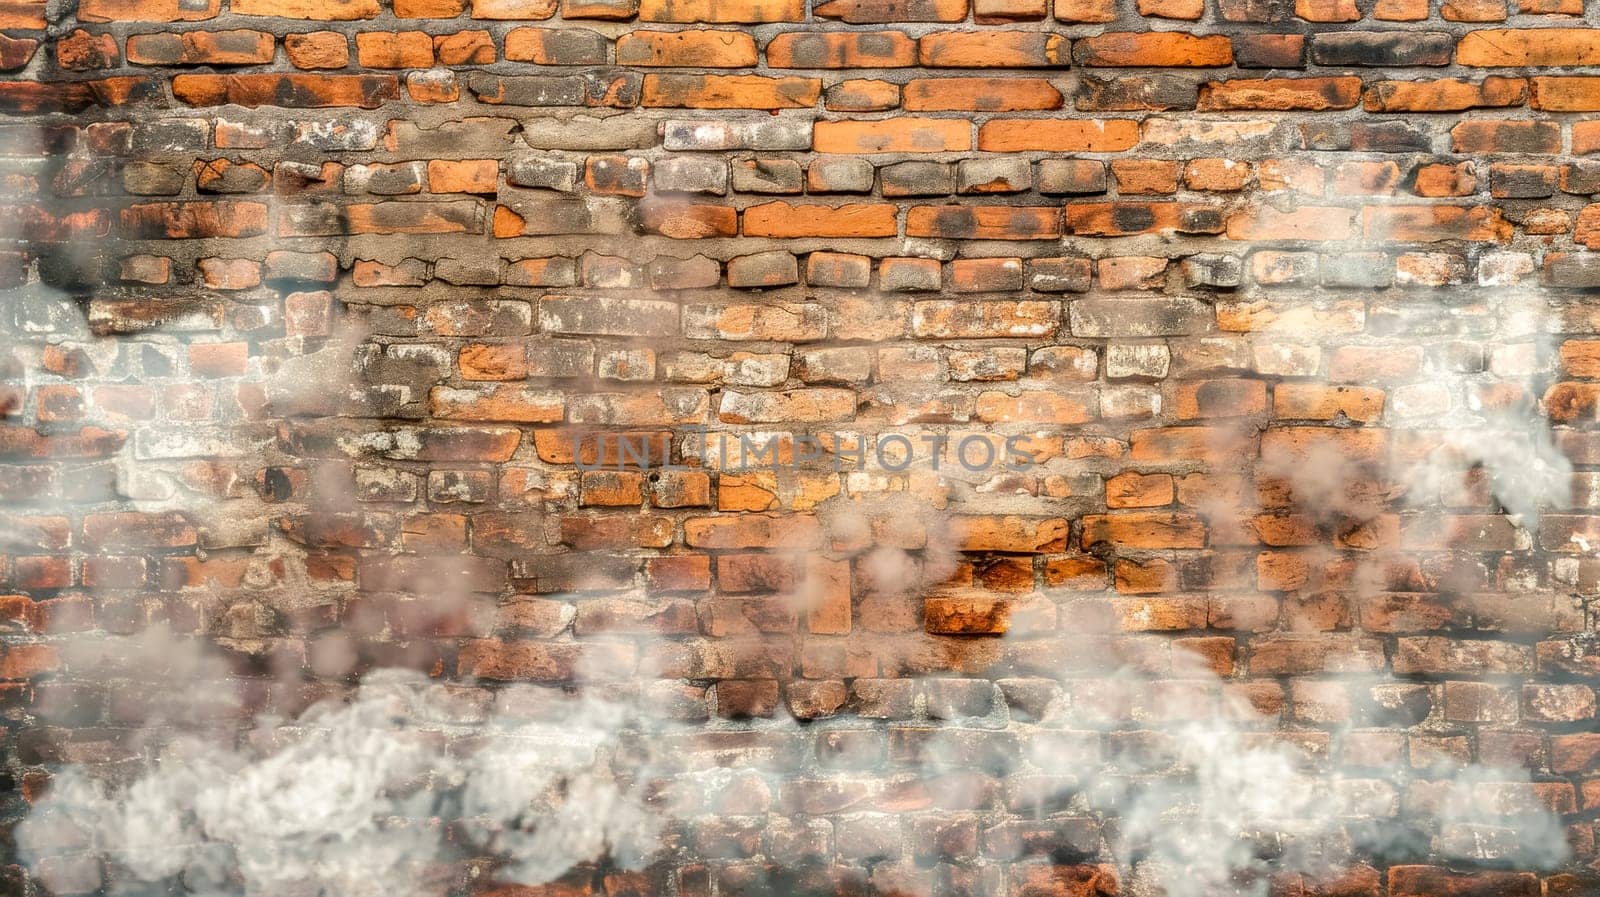 Mysterious brick wall shrouded in mist by Edophoto